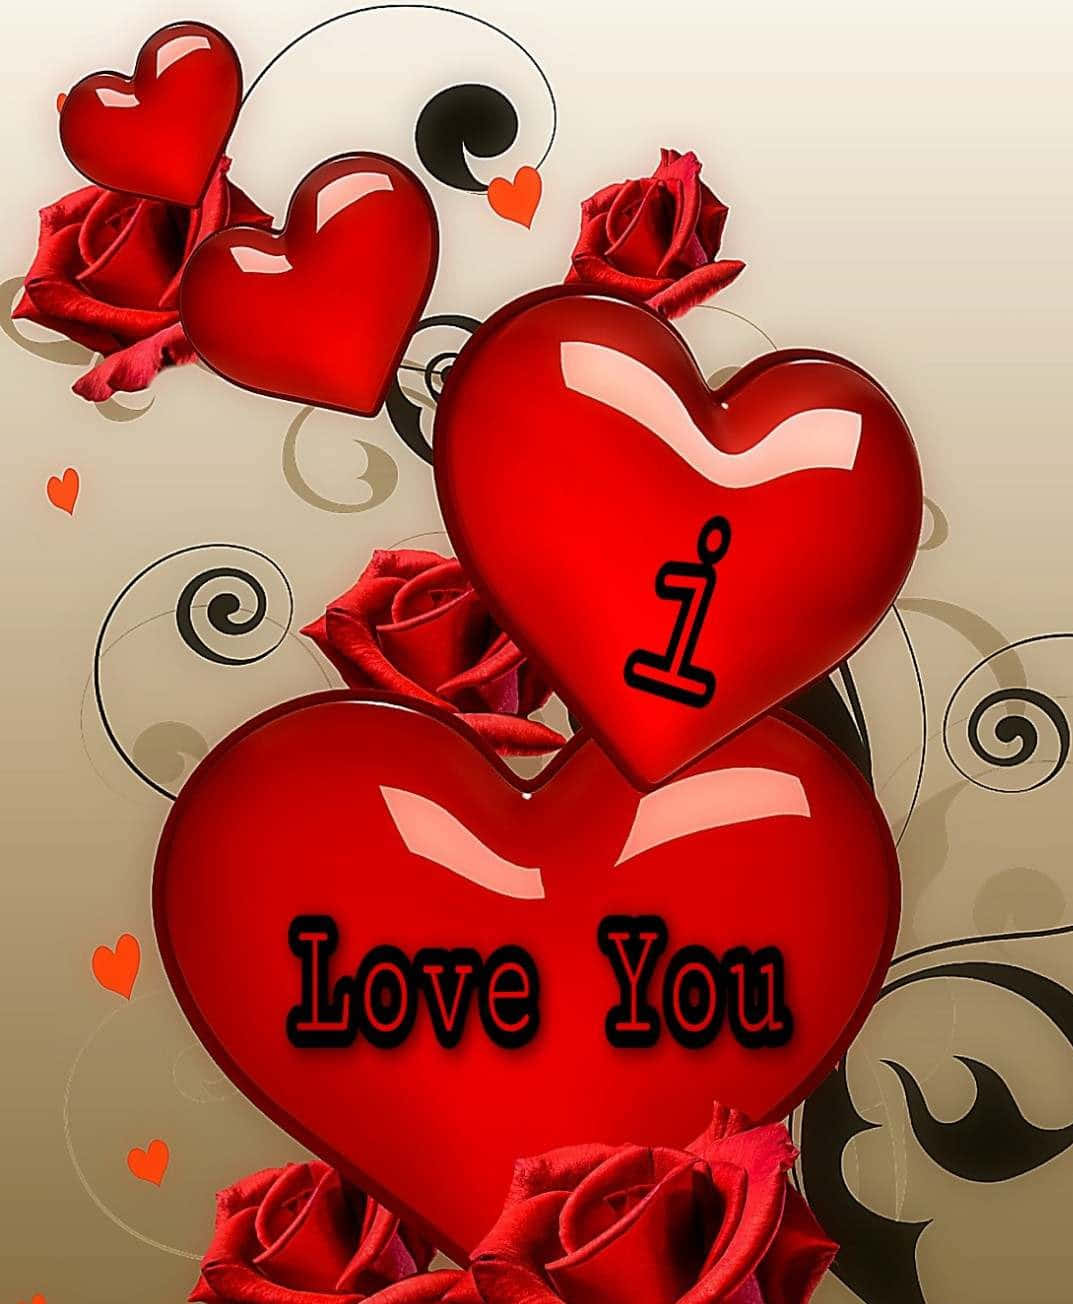 "I Love You" On Red Hearts Picture